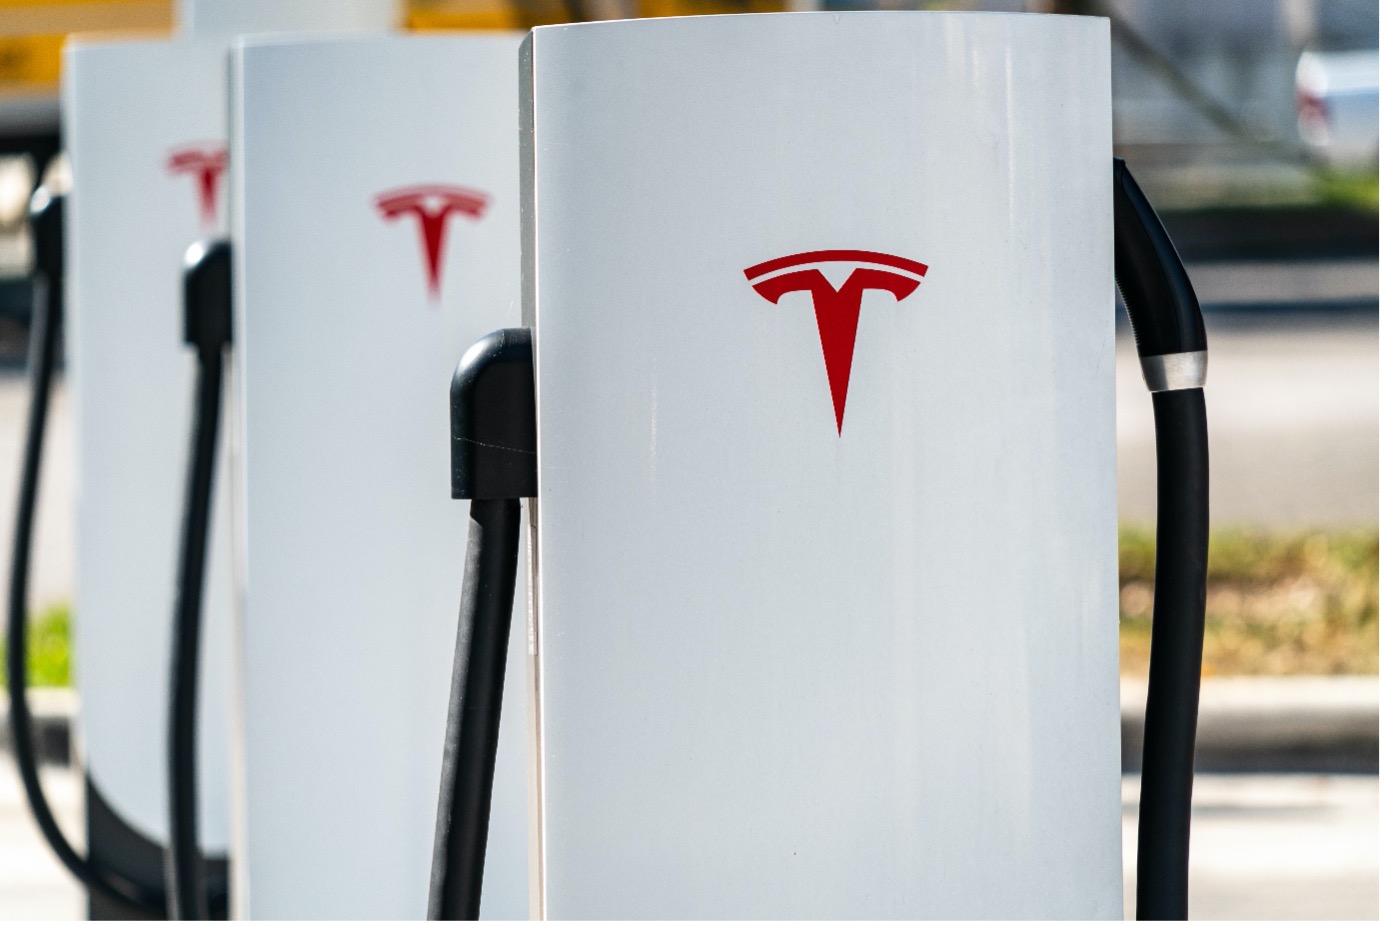 Thousands affected by Tesla recalls